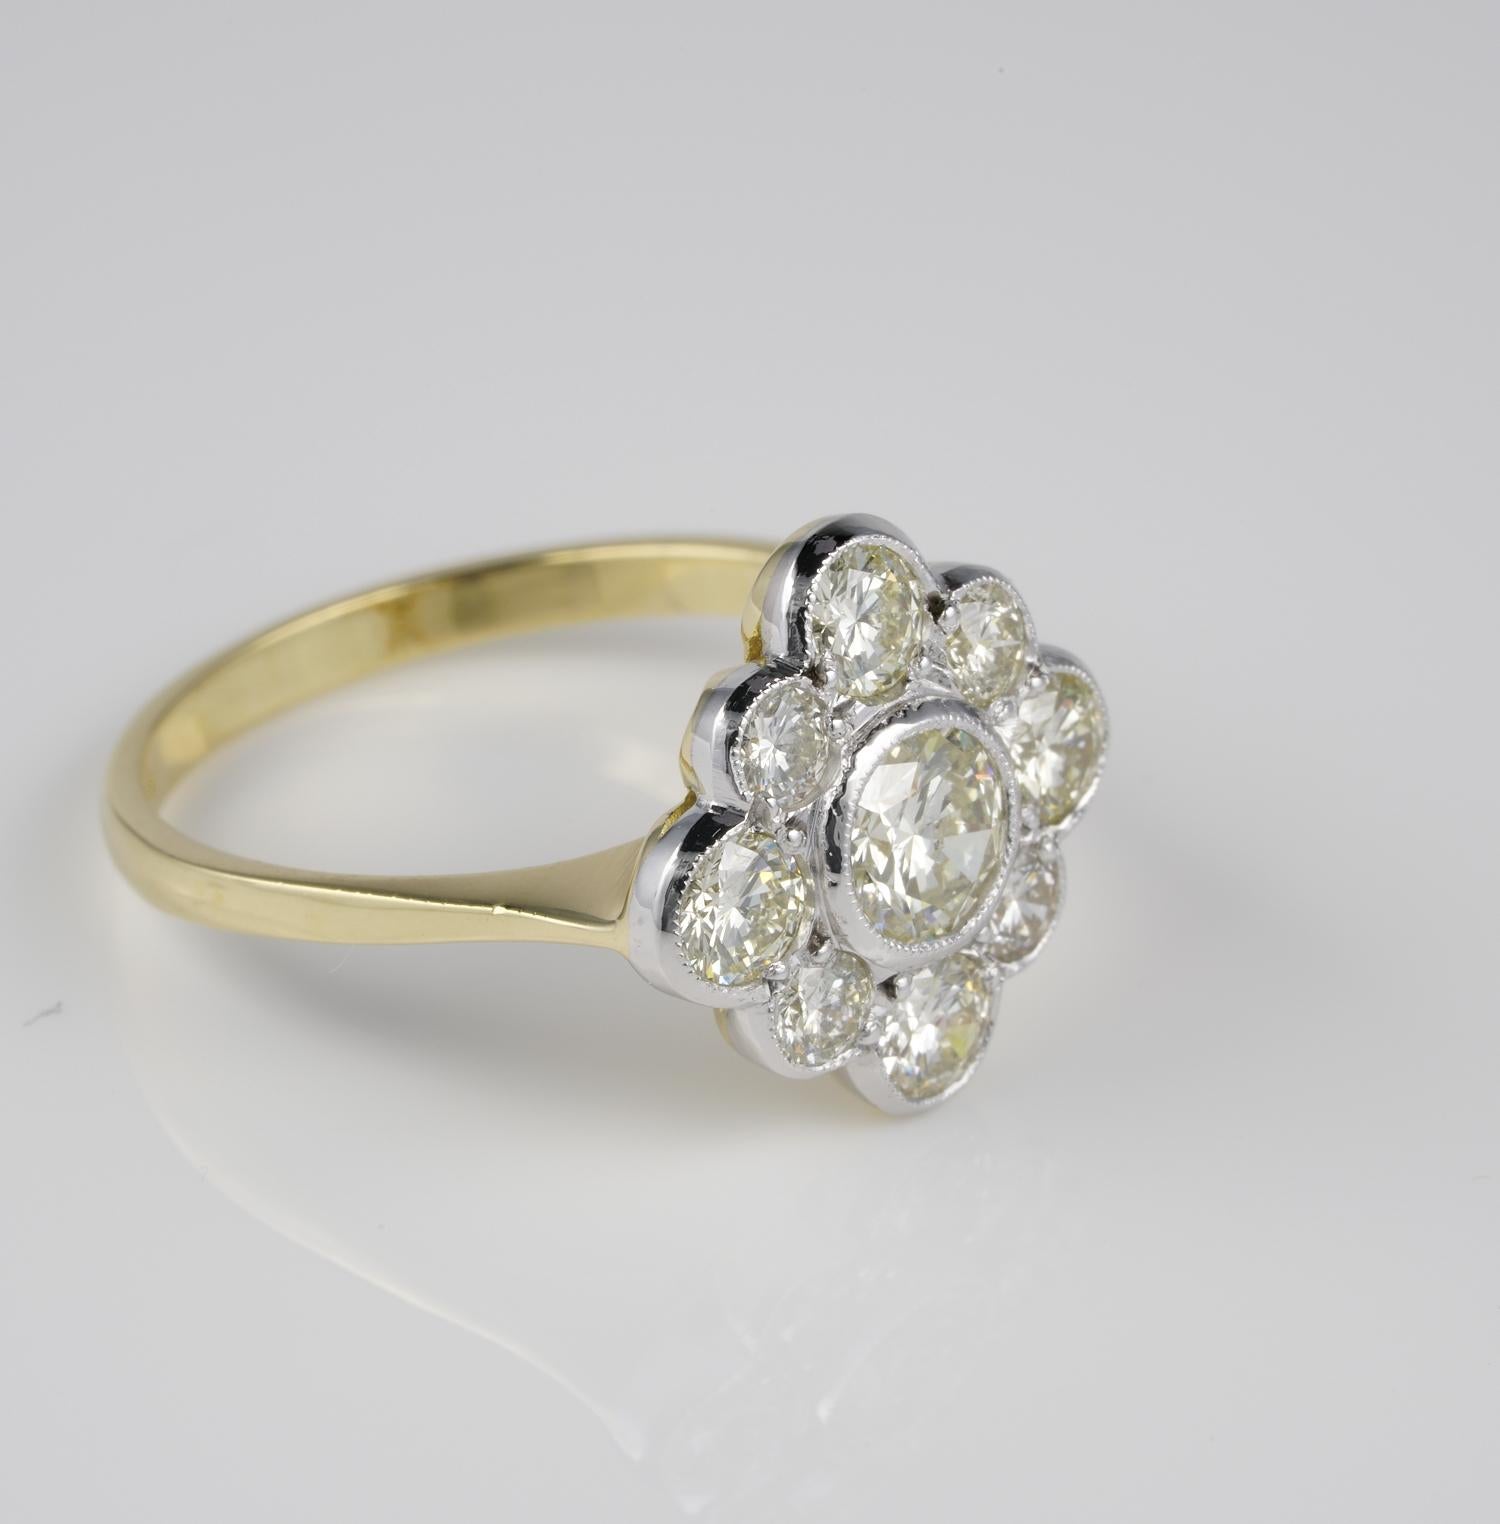 A Burst of Diamonds

This very charming and quite magnificent old cluster ring has with it a quite unique design loaded with a burst of excellent Diamonds together with fine hand crafting of the late 40's approx
Low profile for the crown which is